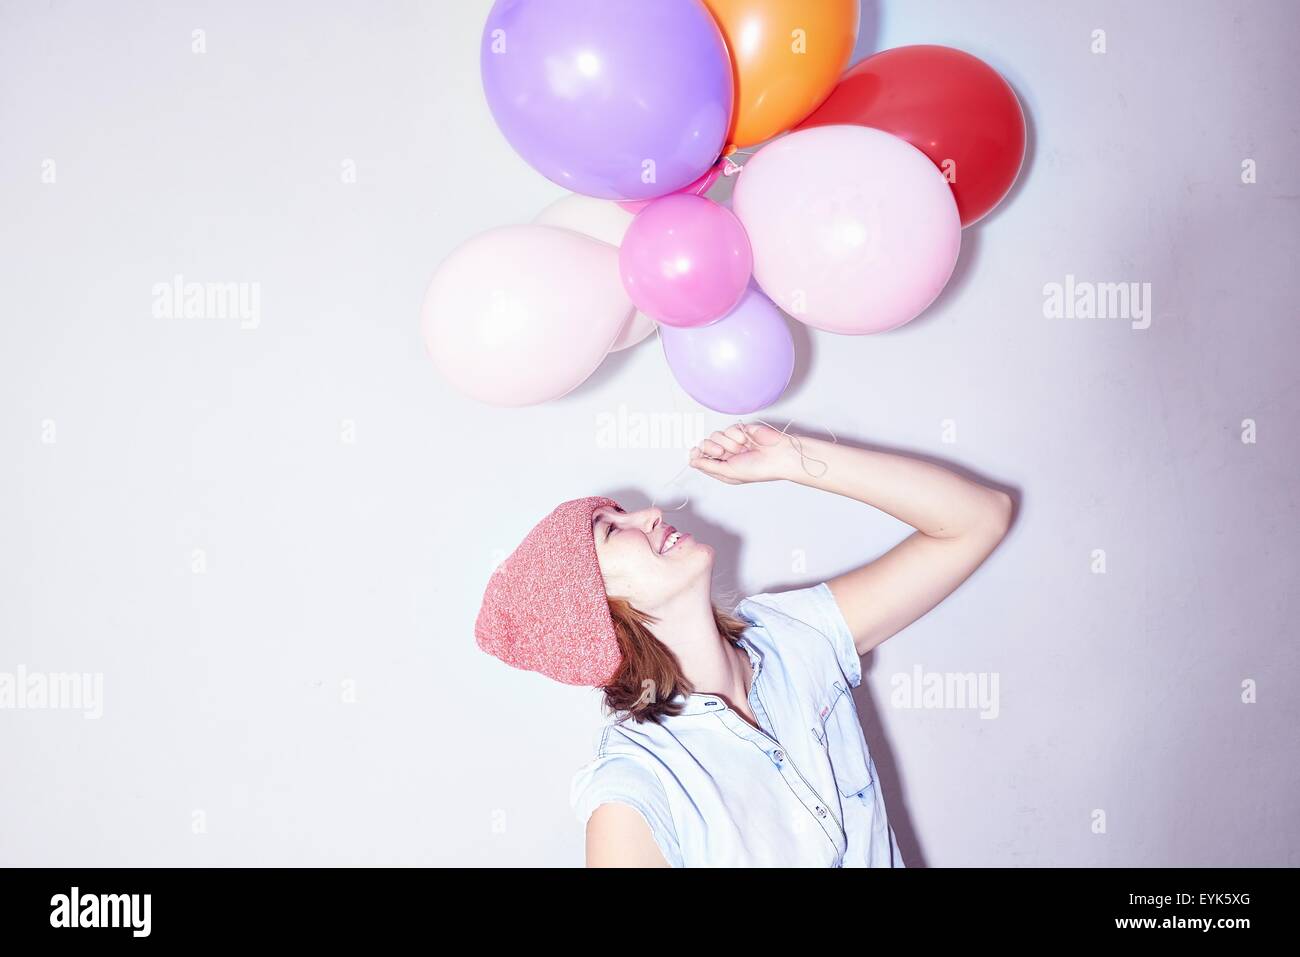 Studio shot of young woman holding up bunch of balloons Stock Photo